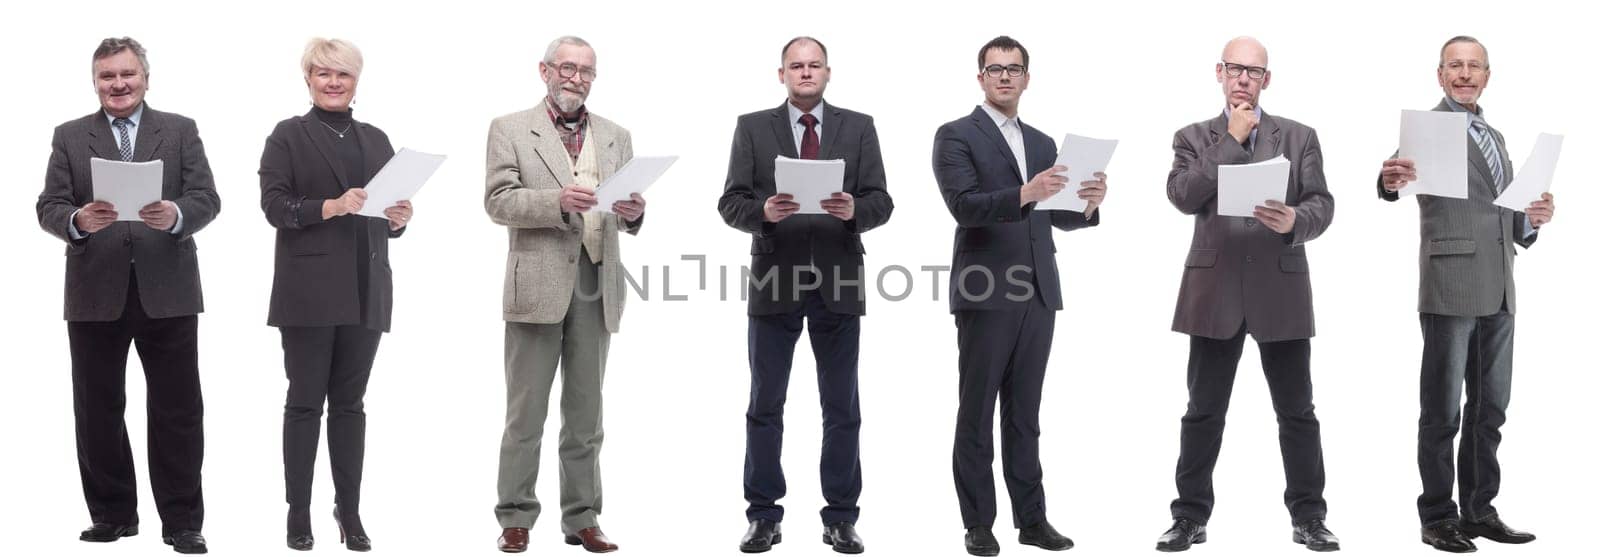 collage of people holding a4 sheet in hands isolated on white background